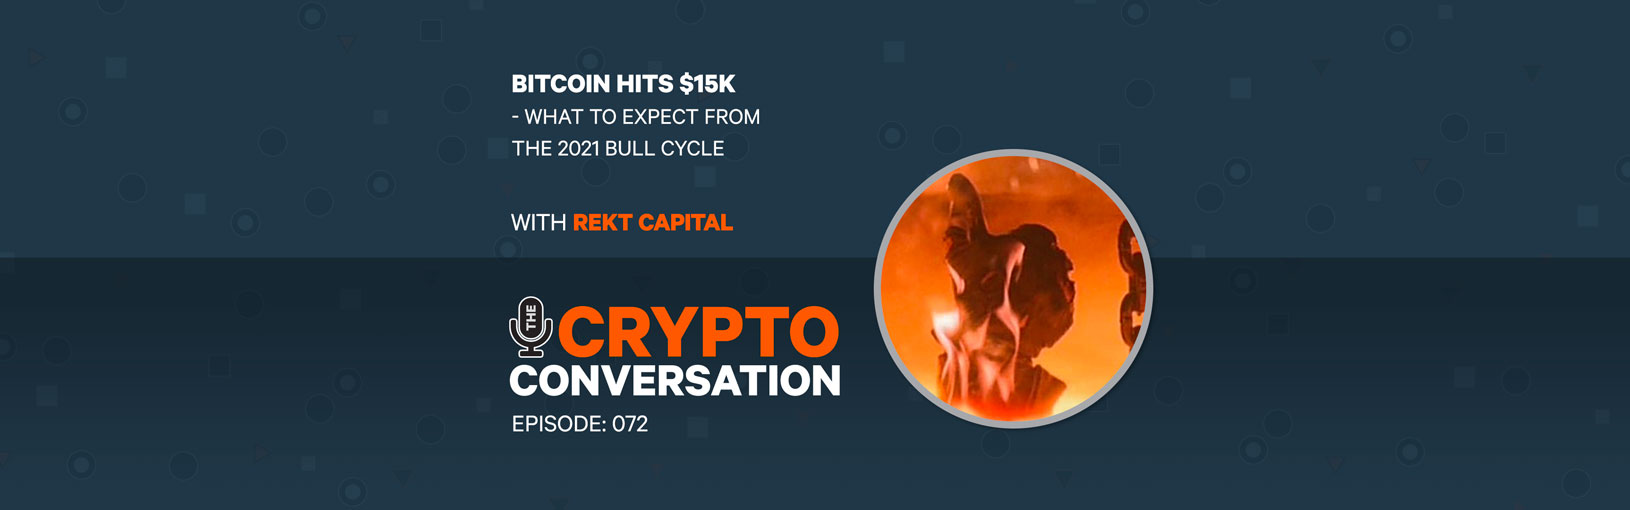 Bitcoin hits $15K – What to expect from the 2021 bull cycle